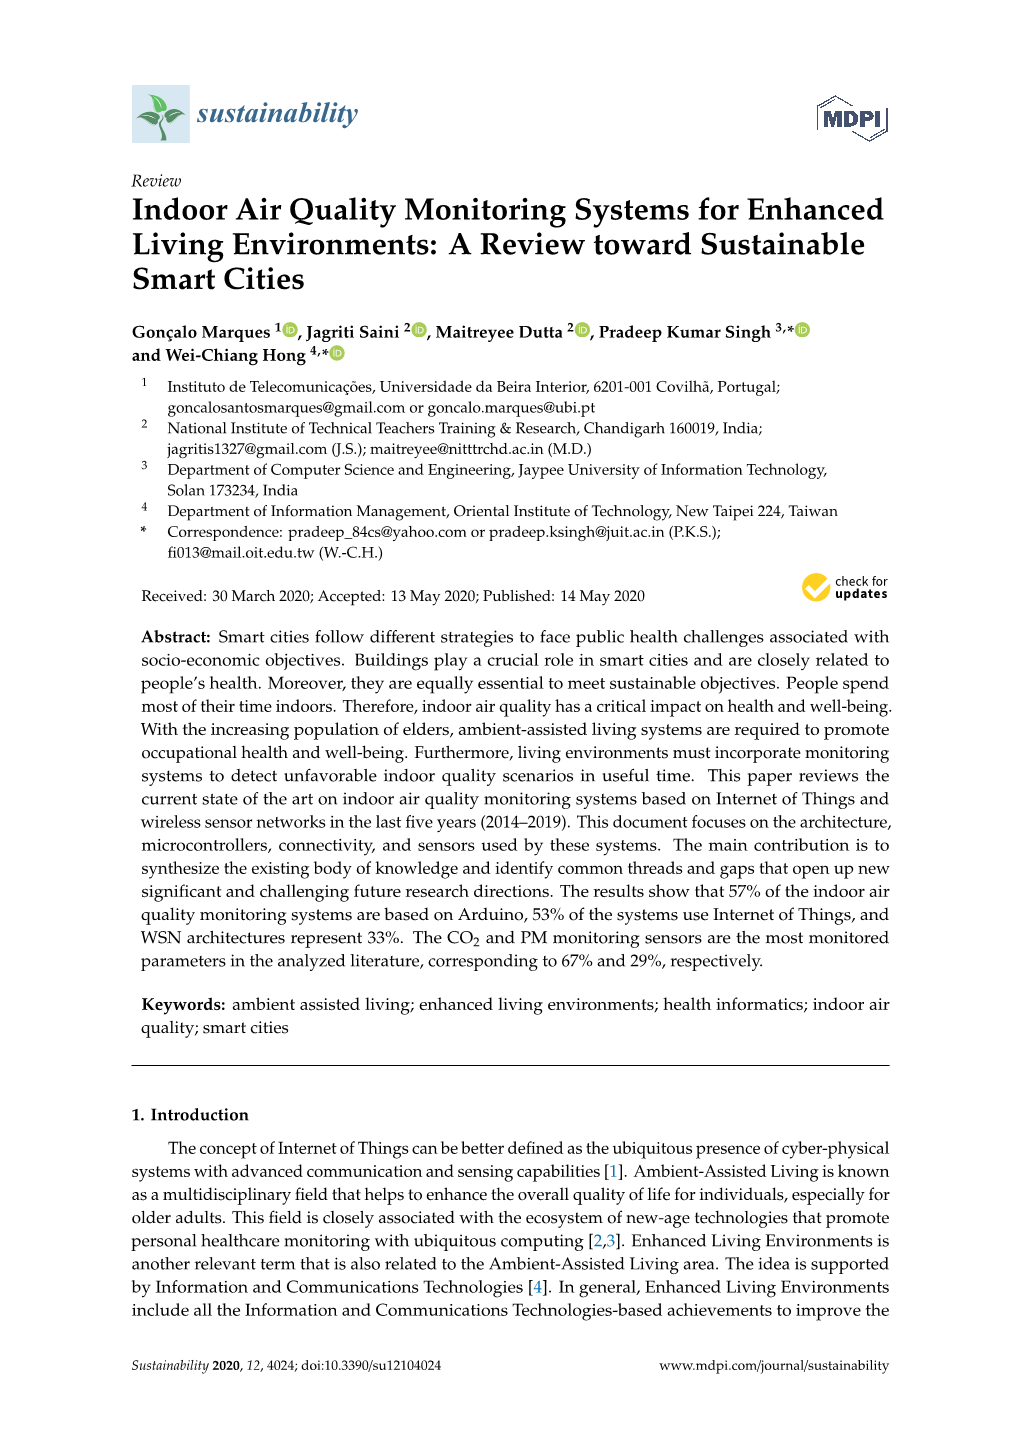 Indoor Air Quality Monitoring Systems for Enhanced Living Environments: a Review Toward Sustainable Smart Cities